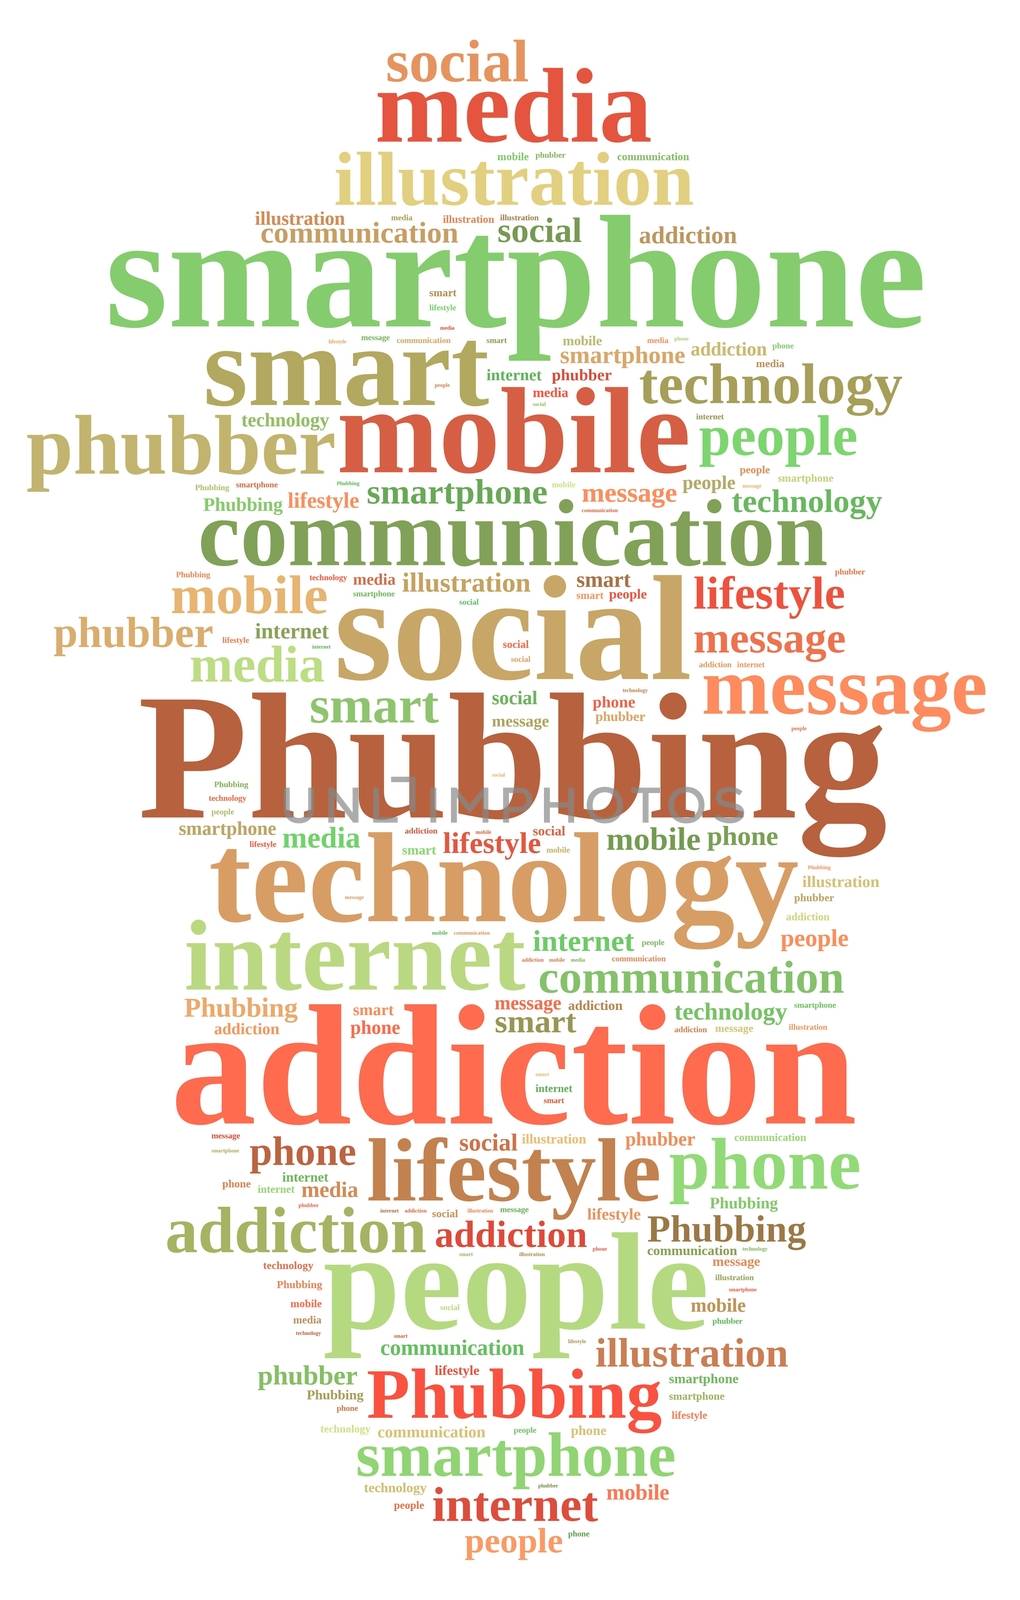 Illustration with word cloud on phubbing, the addiction to mobile